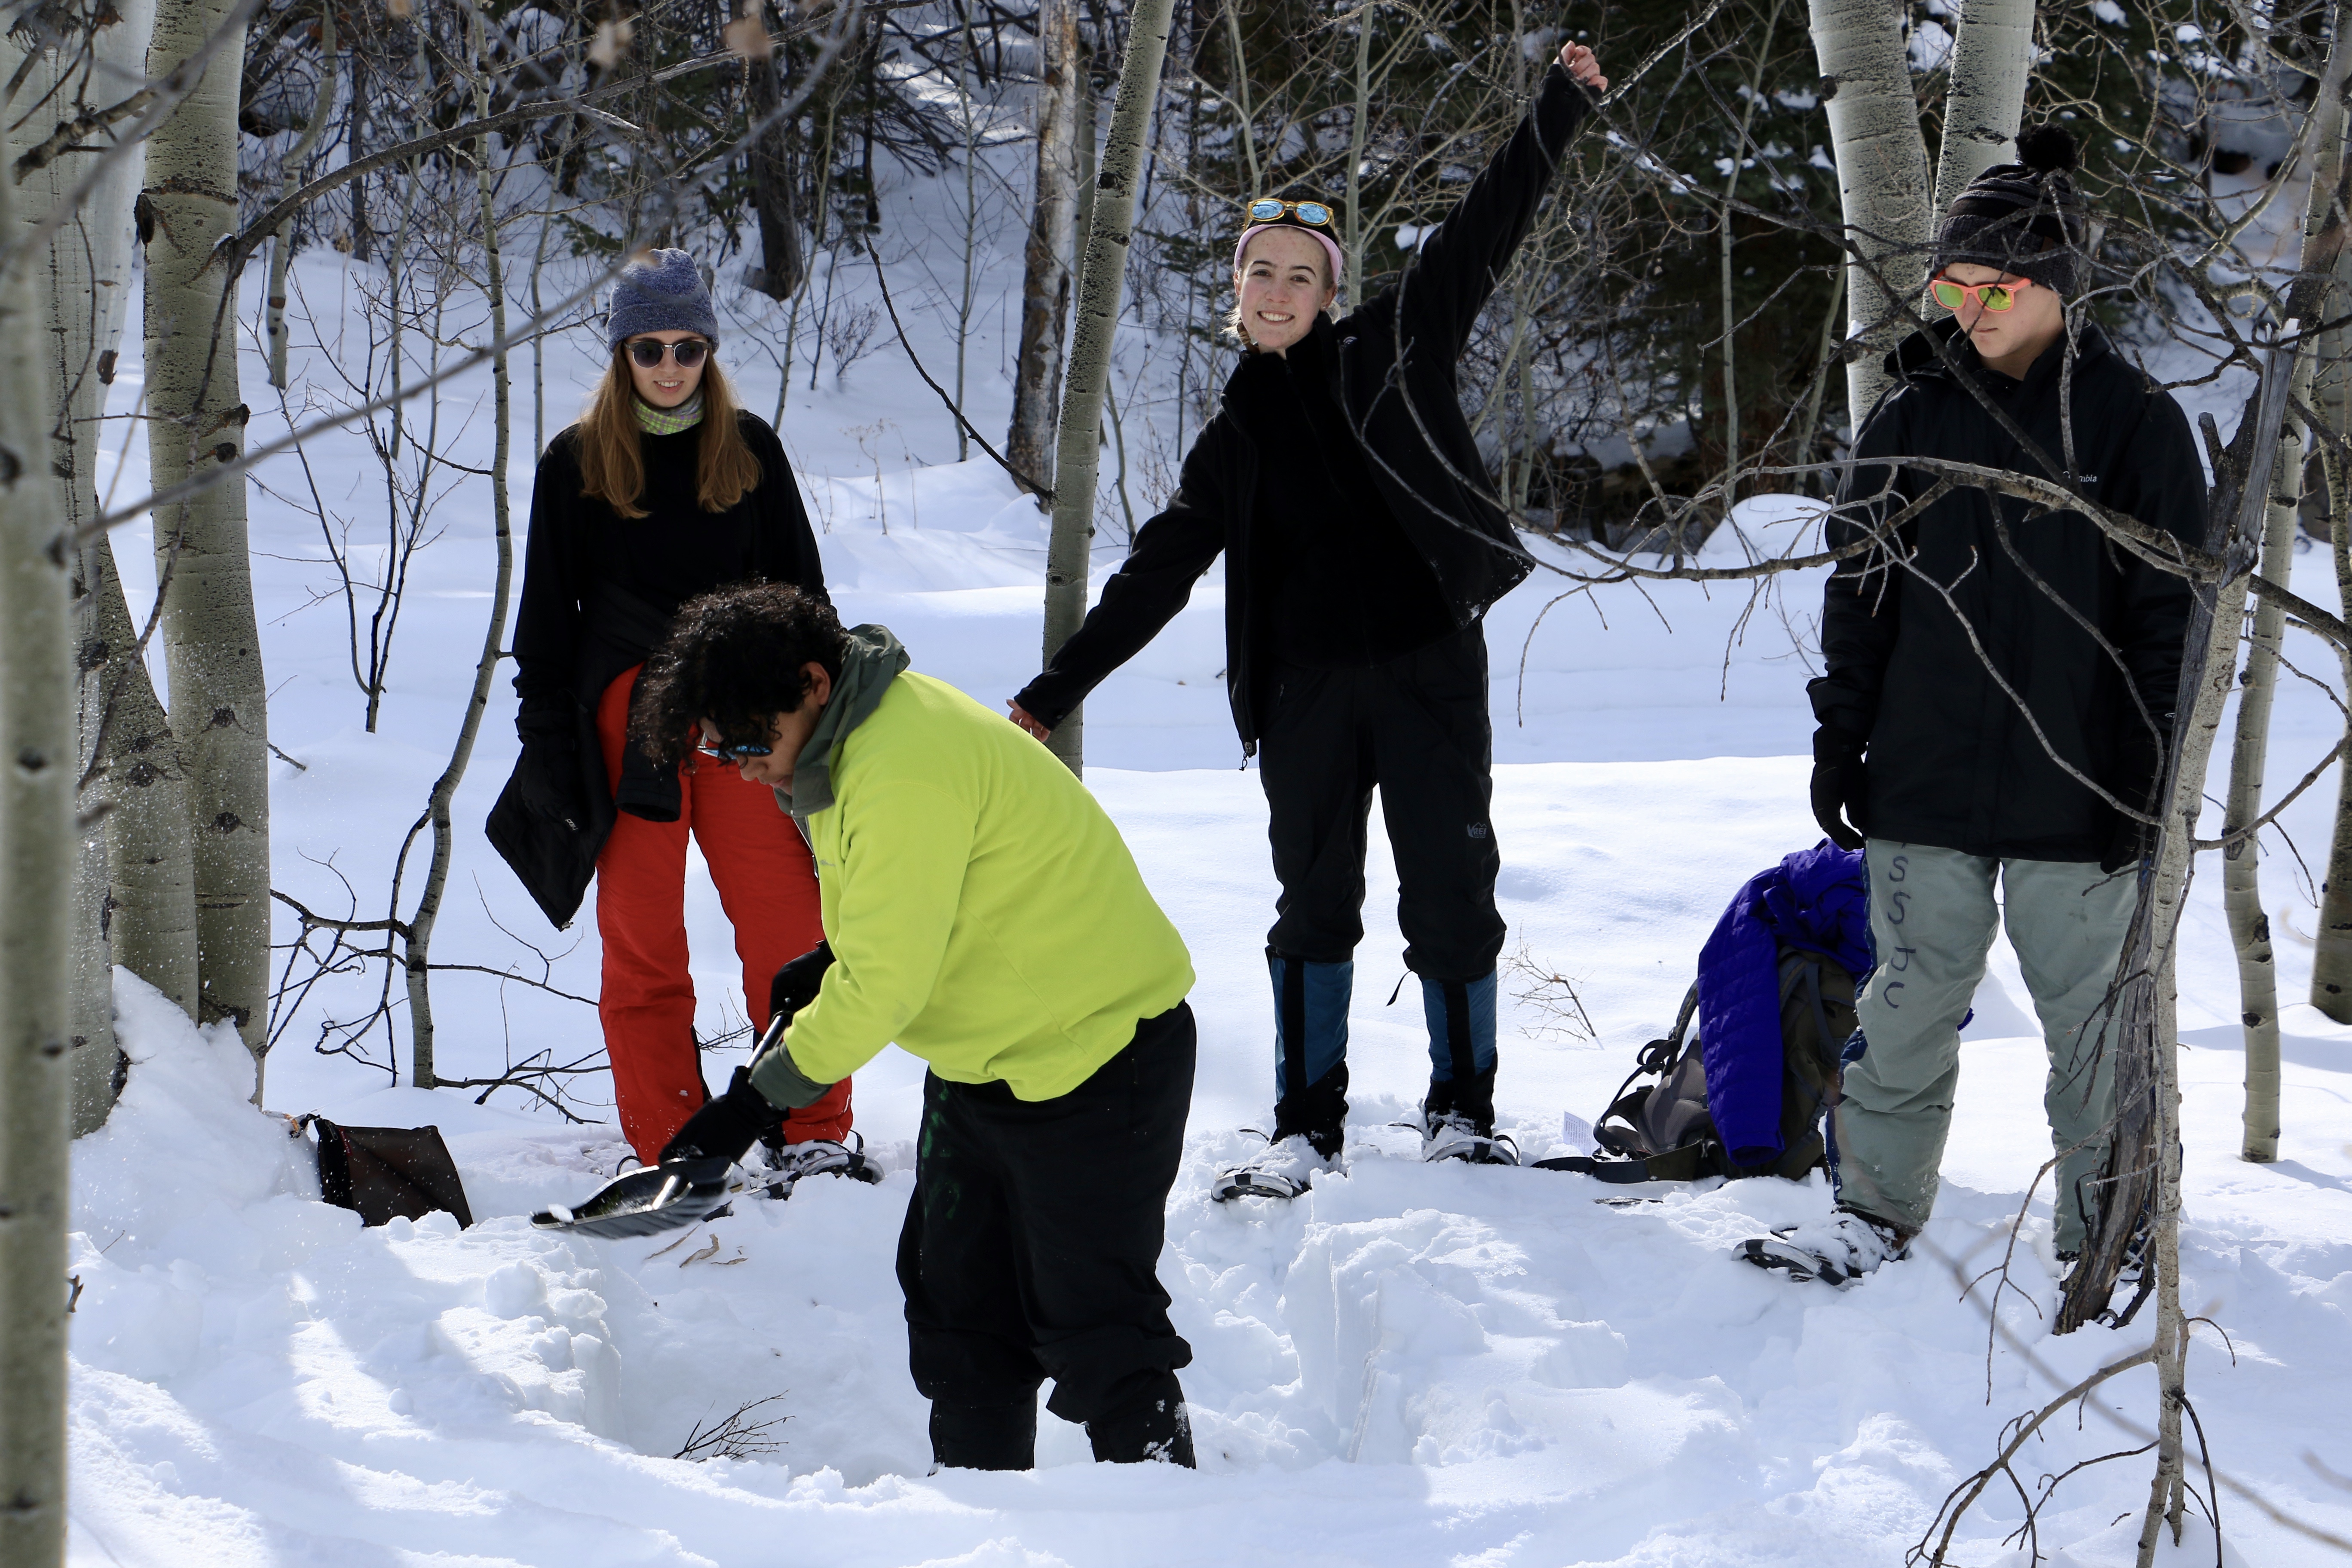 Research team focus on Snow Science